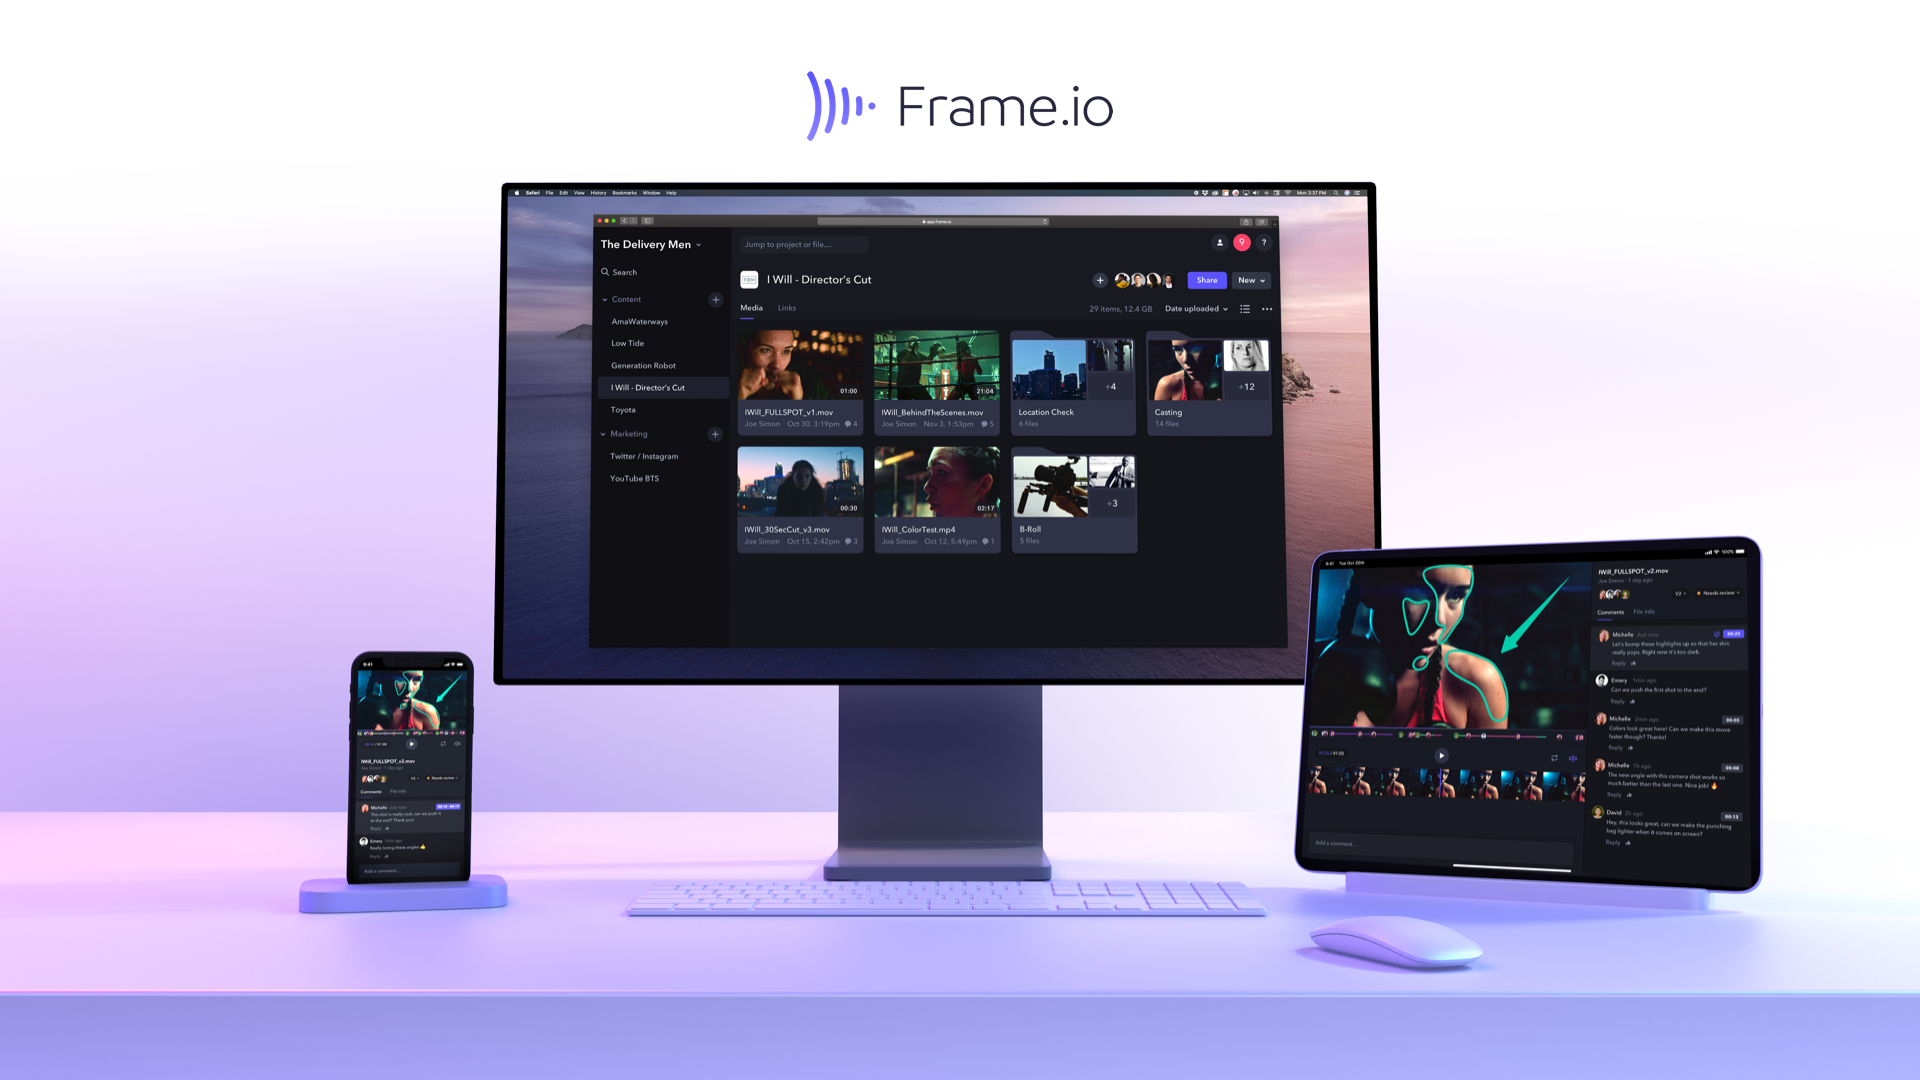 Frame.io's software shown on a computer